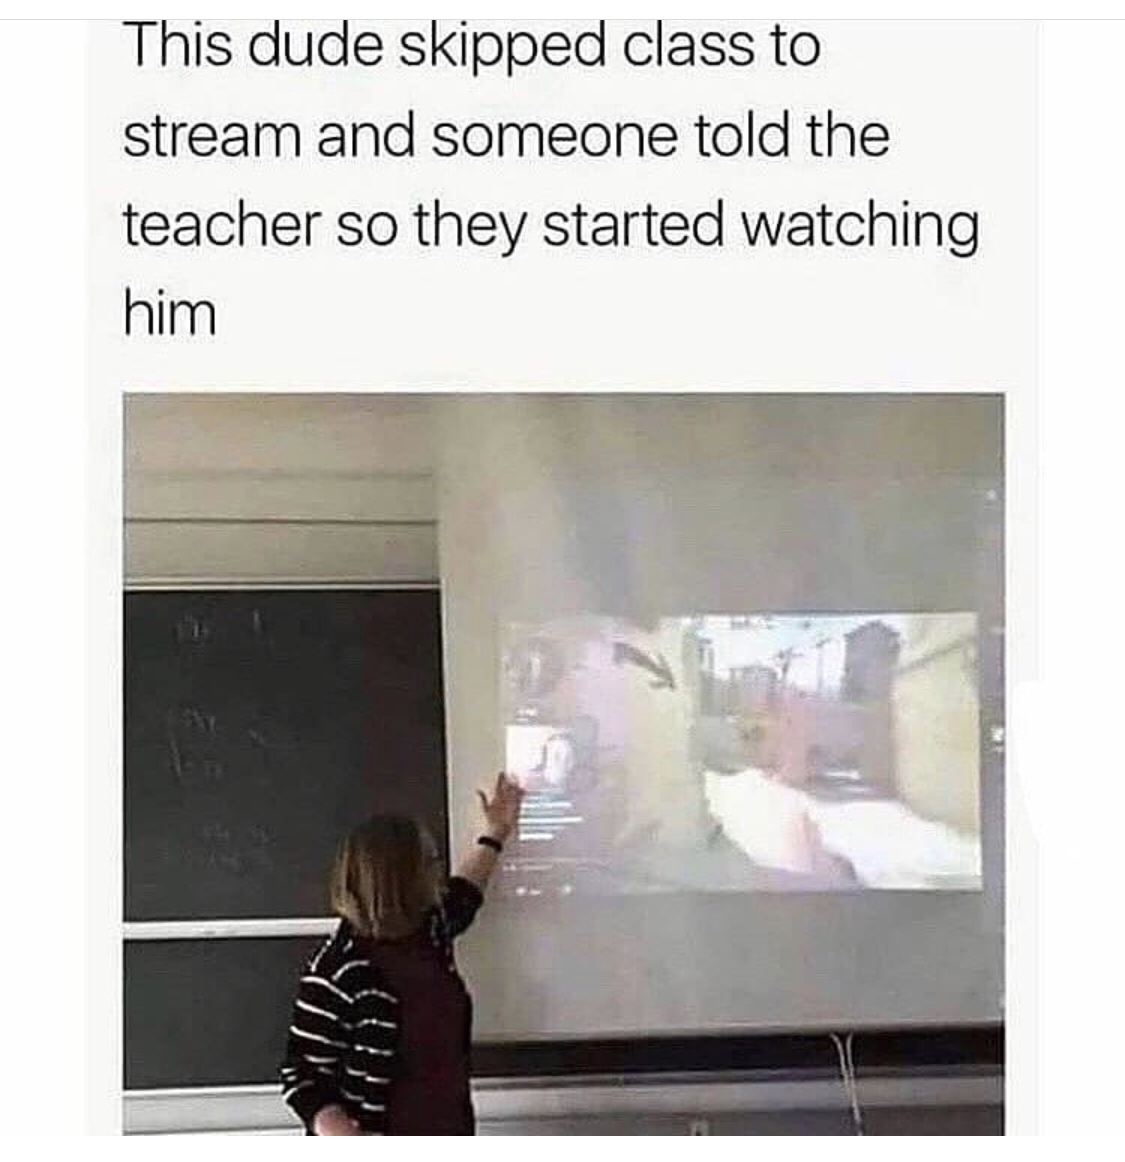 dude skipped class to stream - This dude skipped class to stream and someone told the teacher so they started watching him